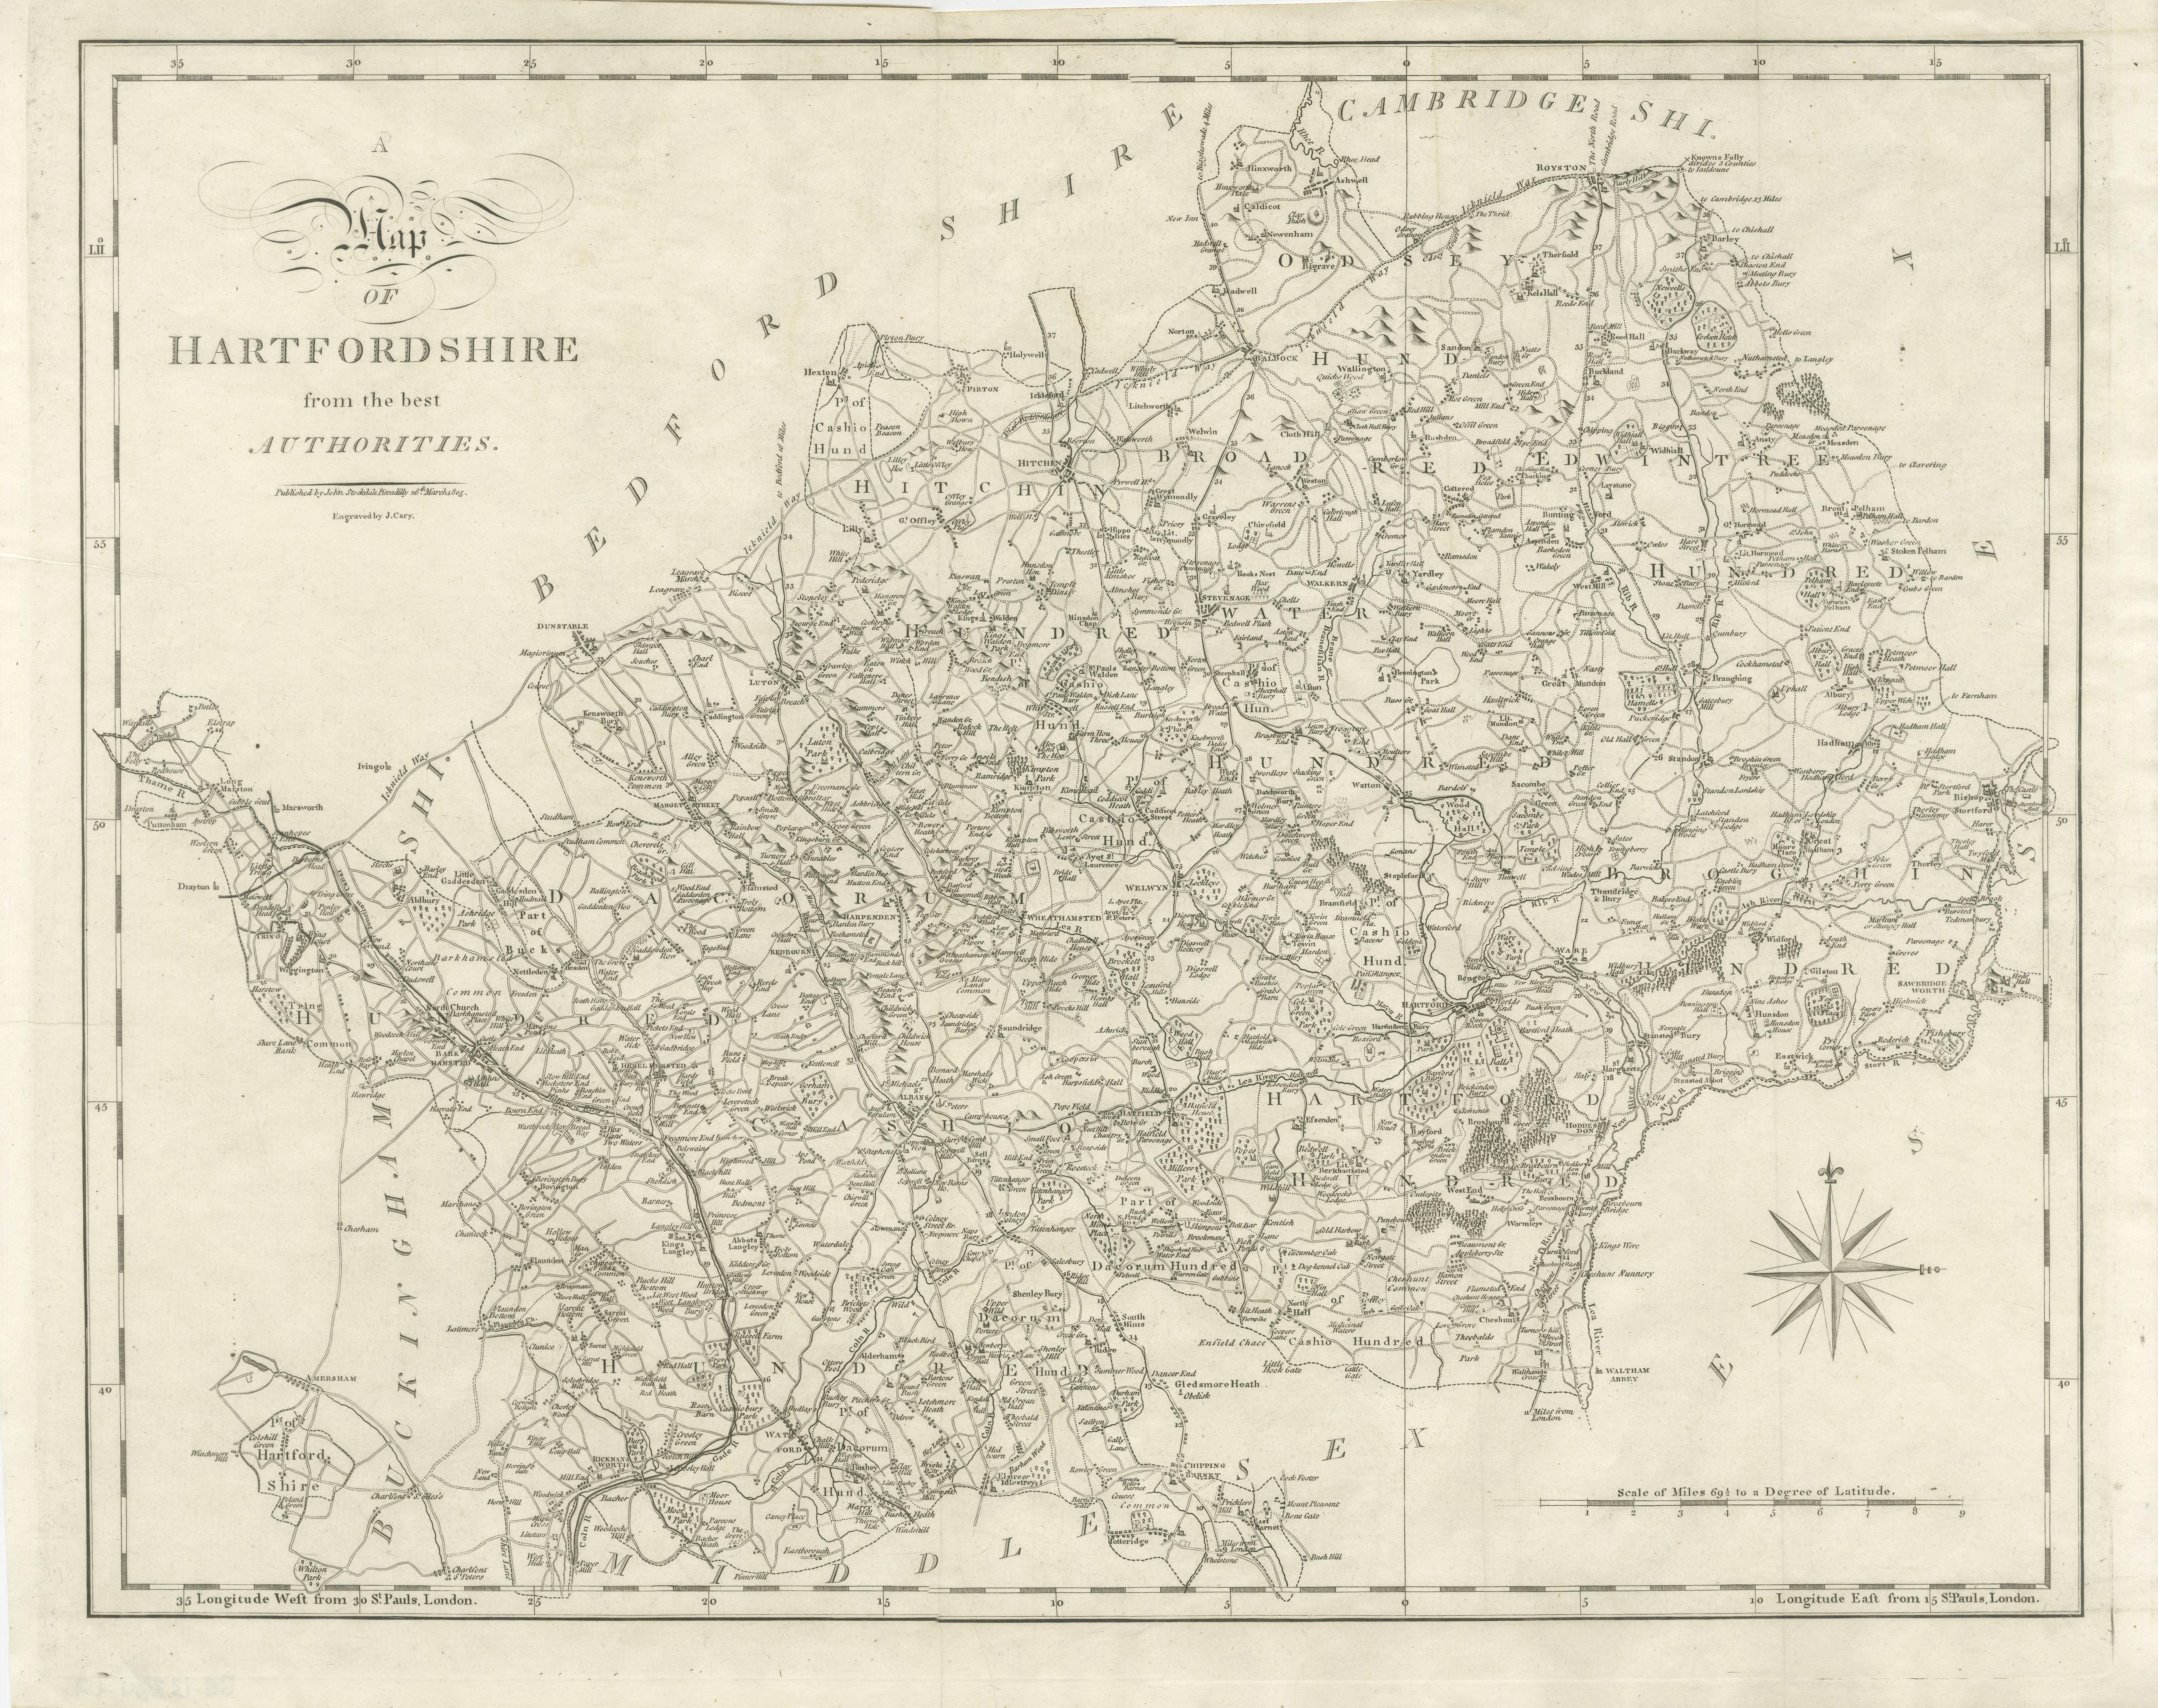 Antique map titled 'A Map of Hartfordshire from the best Authorities'. Original old county map of Hertfordshire, England. Engraved by John Cary. Originates from 'New British Atlas' by John Stockdale, published 1805. 

John Cary (1755-1835) was a